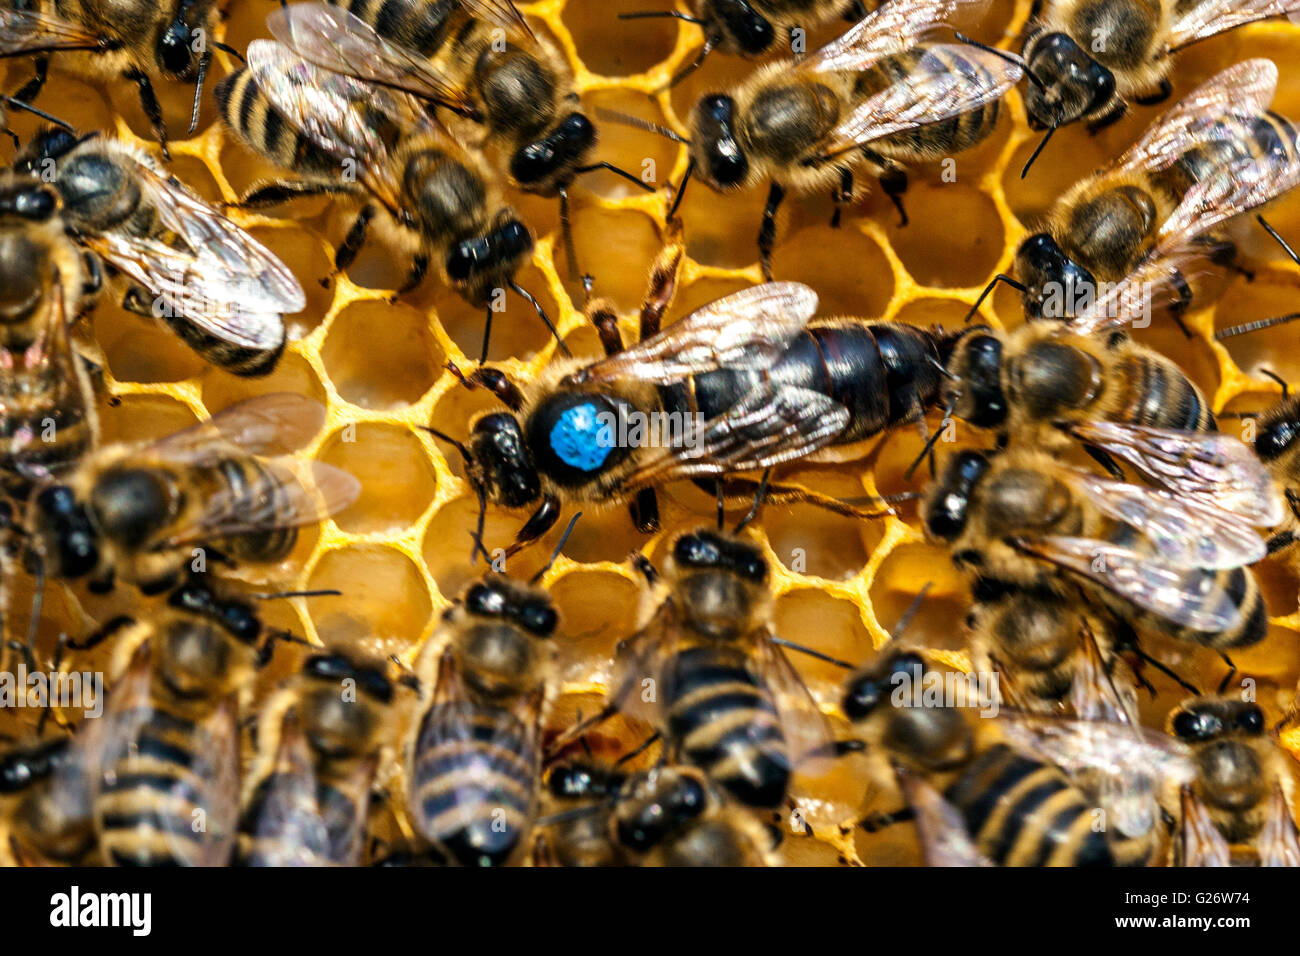 Honey bee Queen, marked and surrounded by worker bees Apis mellifera Stock Photo